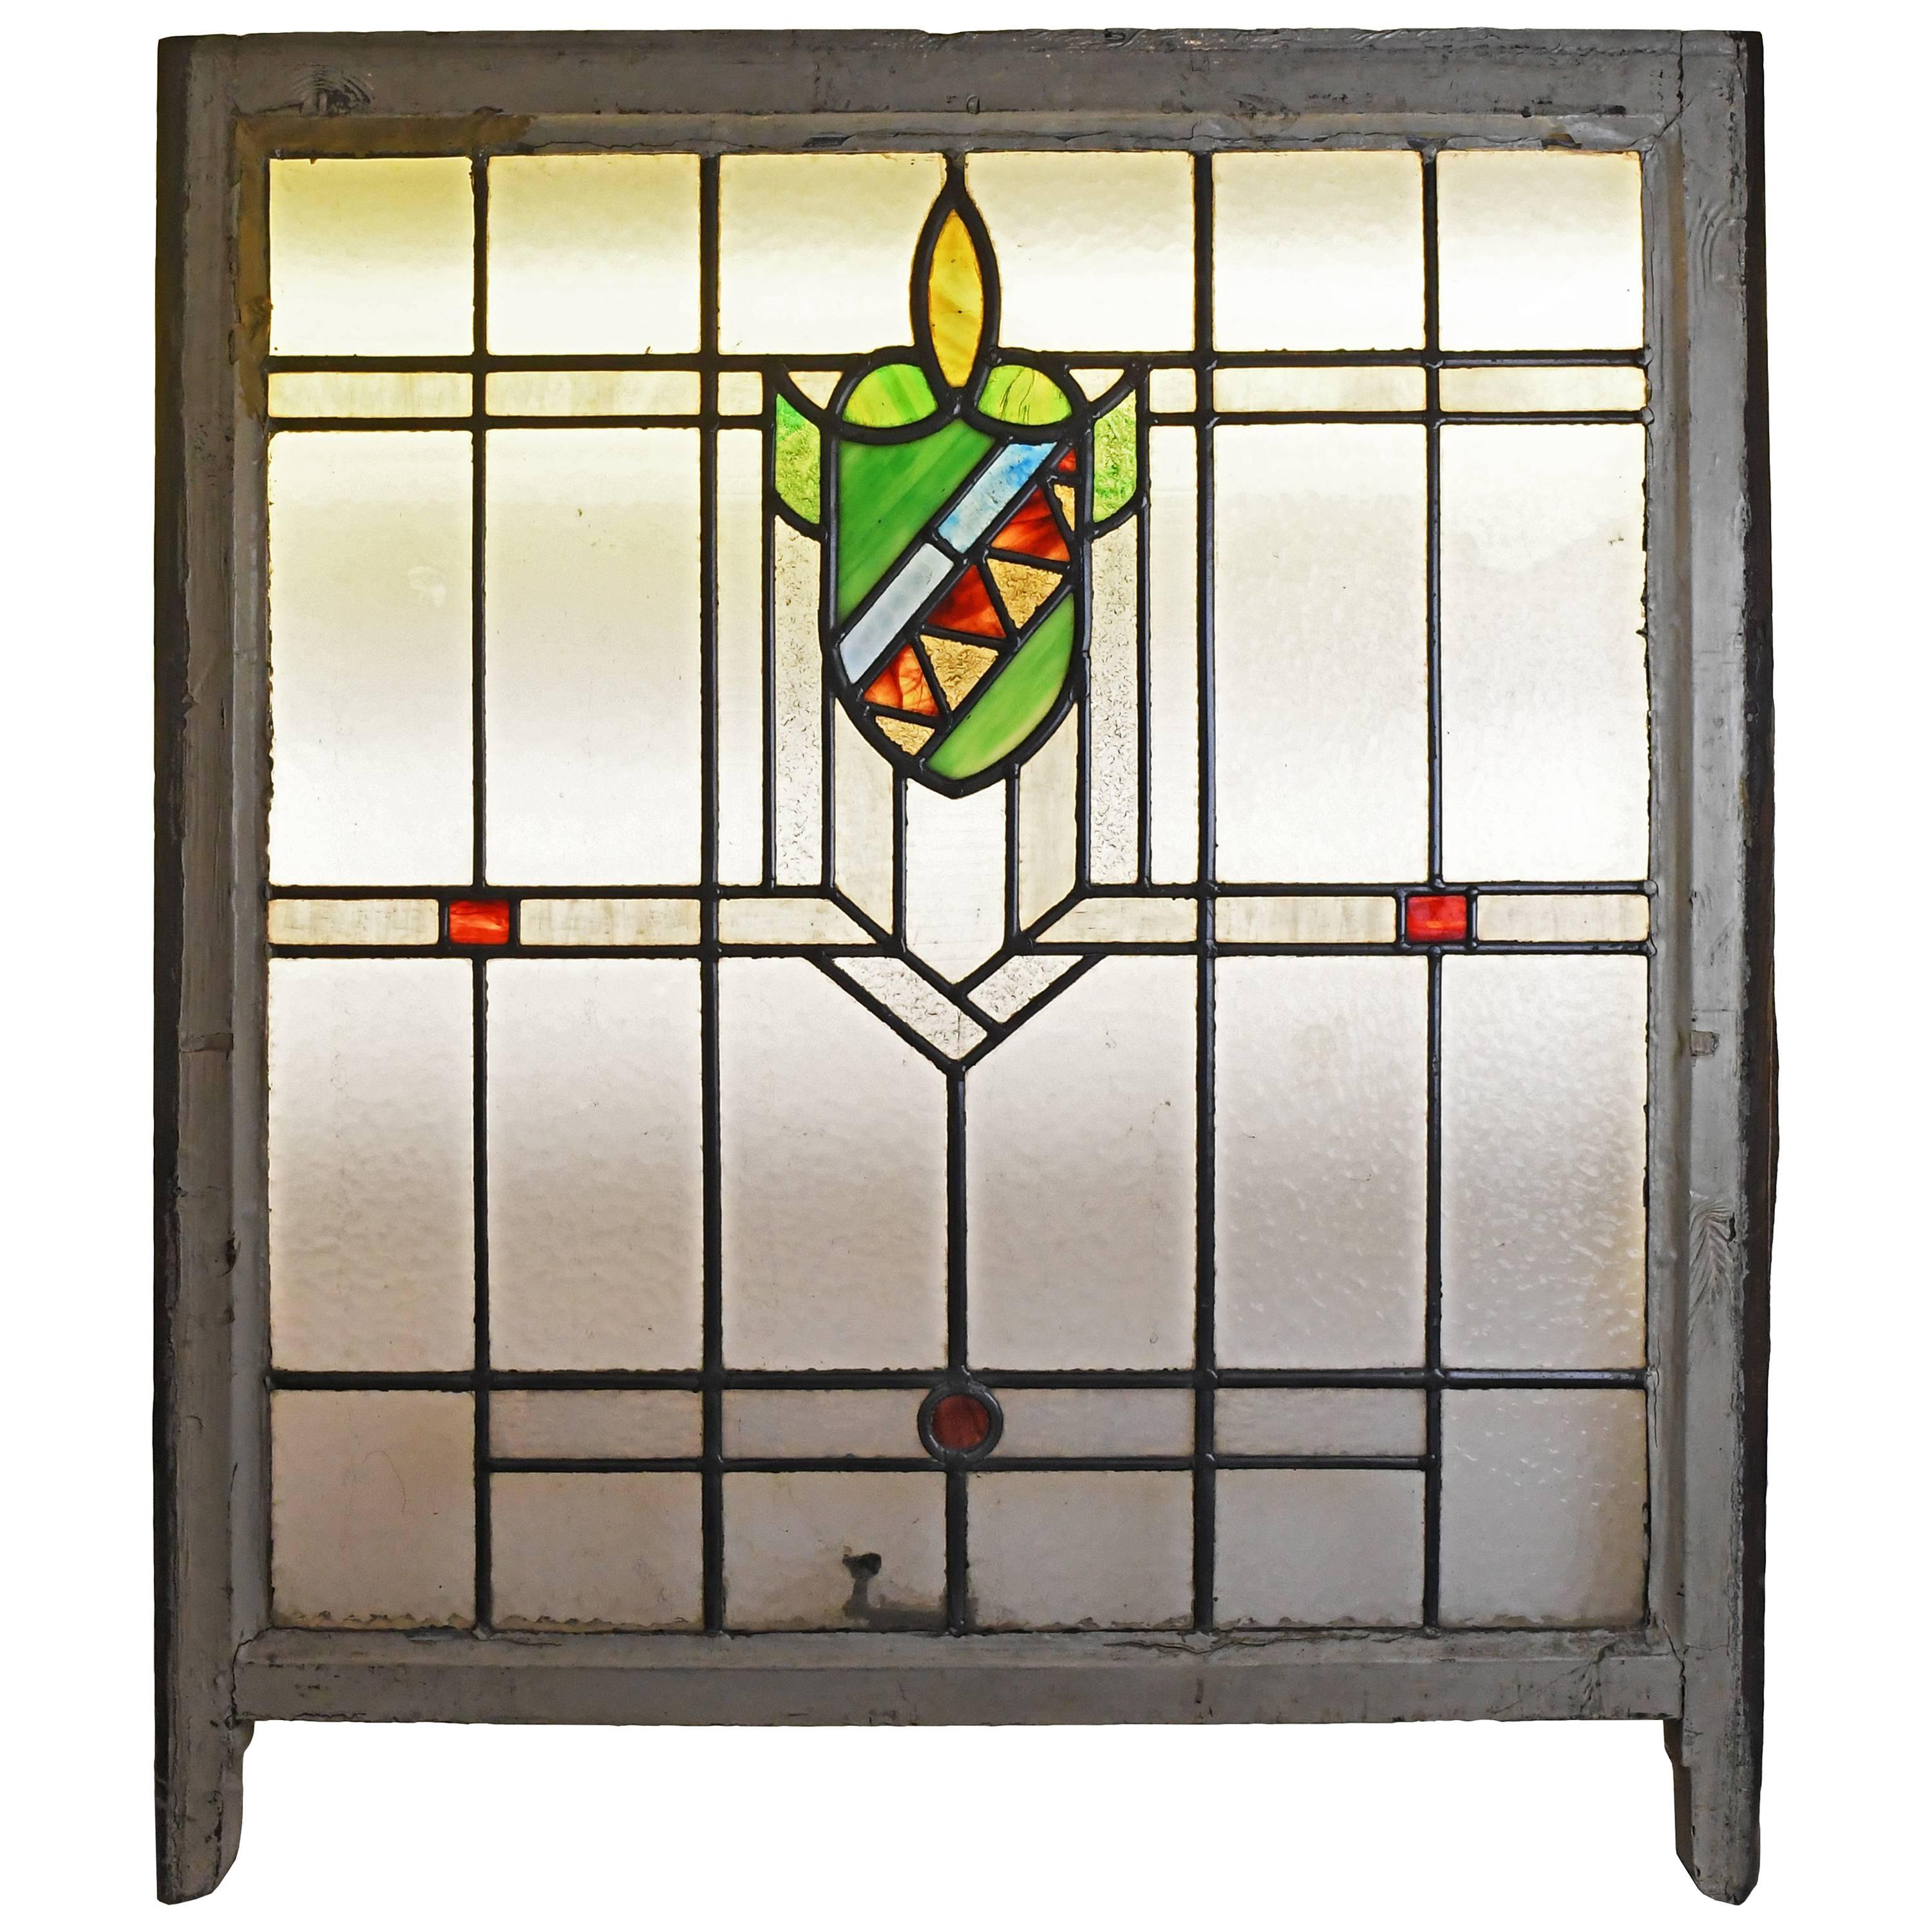 Stained Glass Window with Red and Green Shield